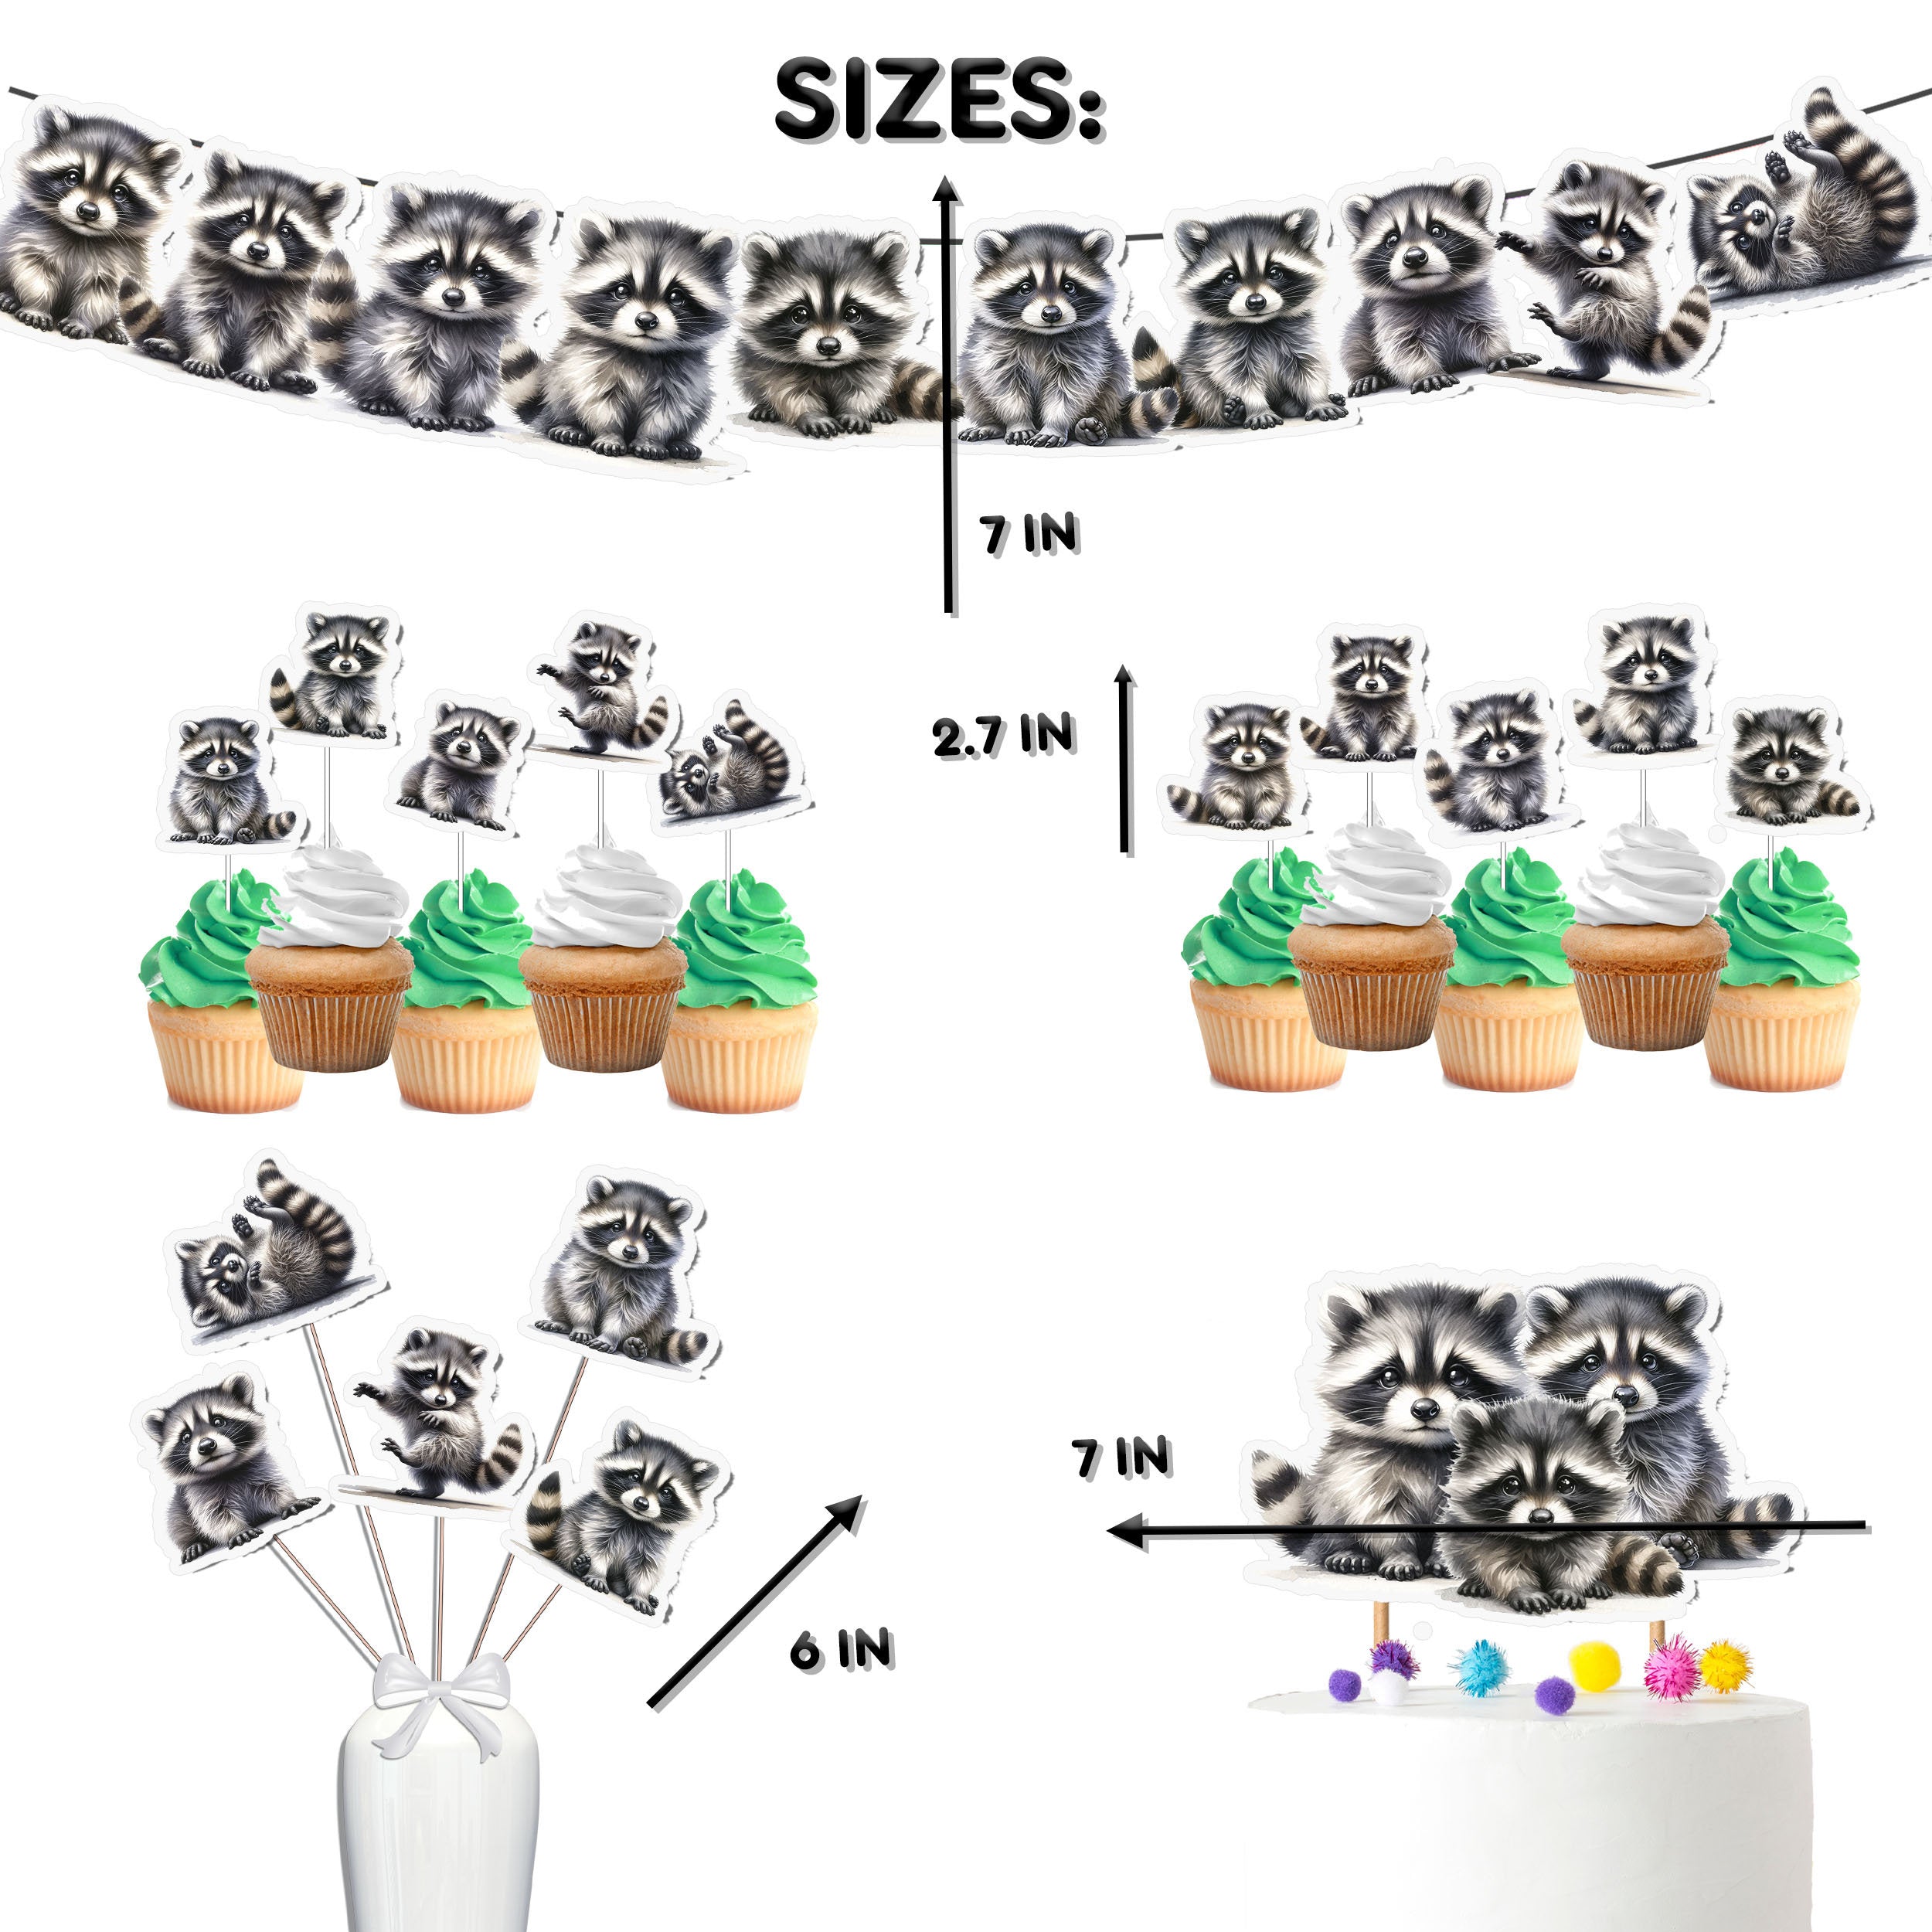 Mischievous Raccoon Party Decor Set - Playful Cake Topper, Cupcake Toppers, Centerpieces & Banner for Baby Showers and Birthdays